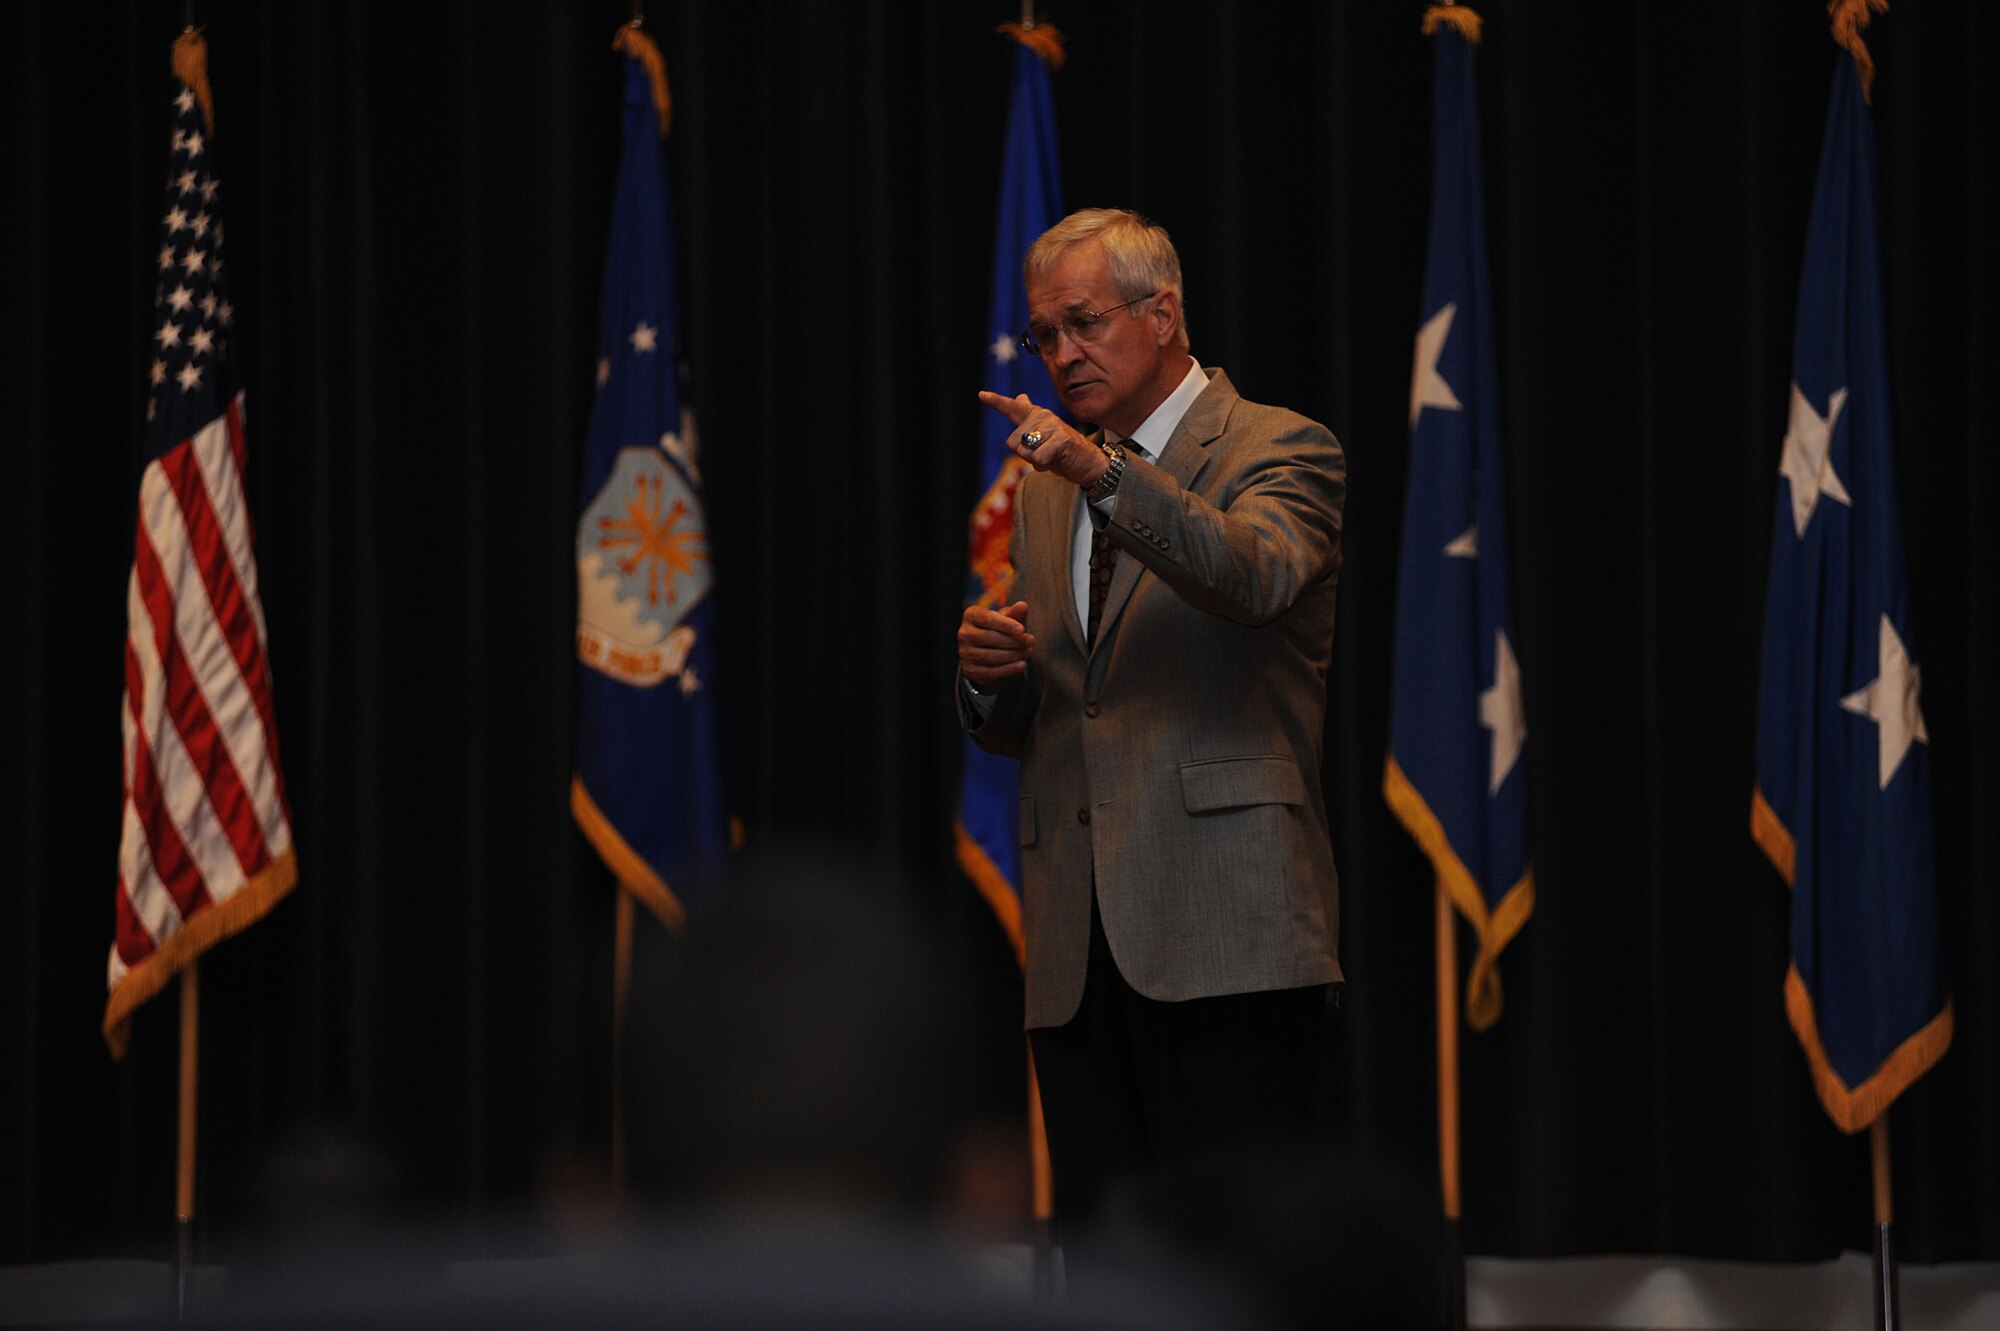 Lieutenant General (Retired) Chris Kelly spoke about leadership, trust and integrity to a packed crowd of more than 275 people in the U.S. Air Force Expeditionary Center's Grace Peterson hall, June 19.  Gen. Kelly was the third in a series of professional development speakers to address the center, students and staff as part of the on-going 15th Anniversary celebration. (U.S. Air Force Photo/Staff Sgt. Nathan G. Bevier) 